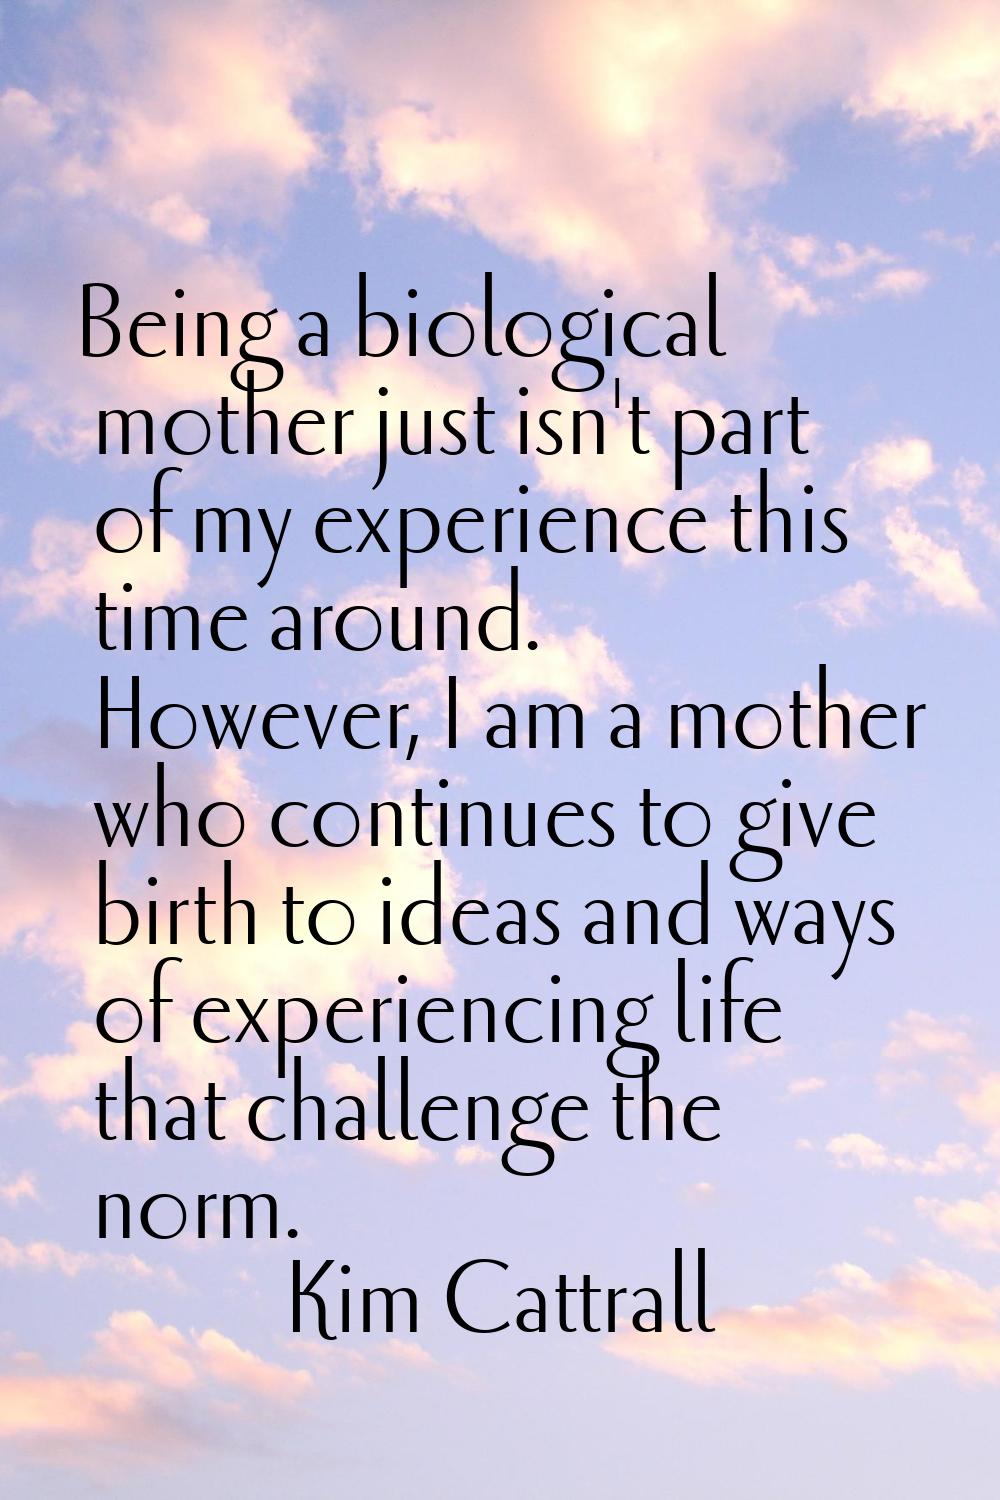 Being a biological mother just isn't part of my experience this time around. However, I am a mother